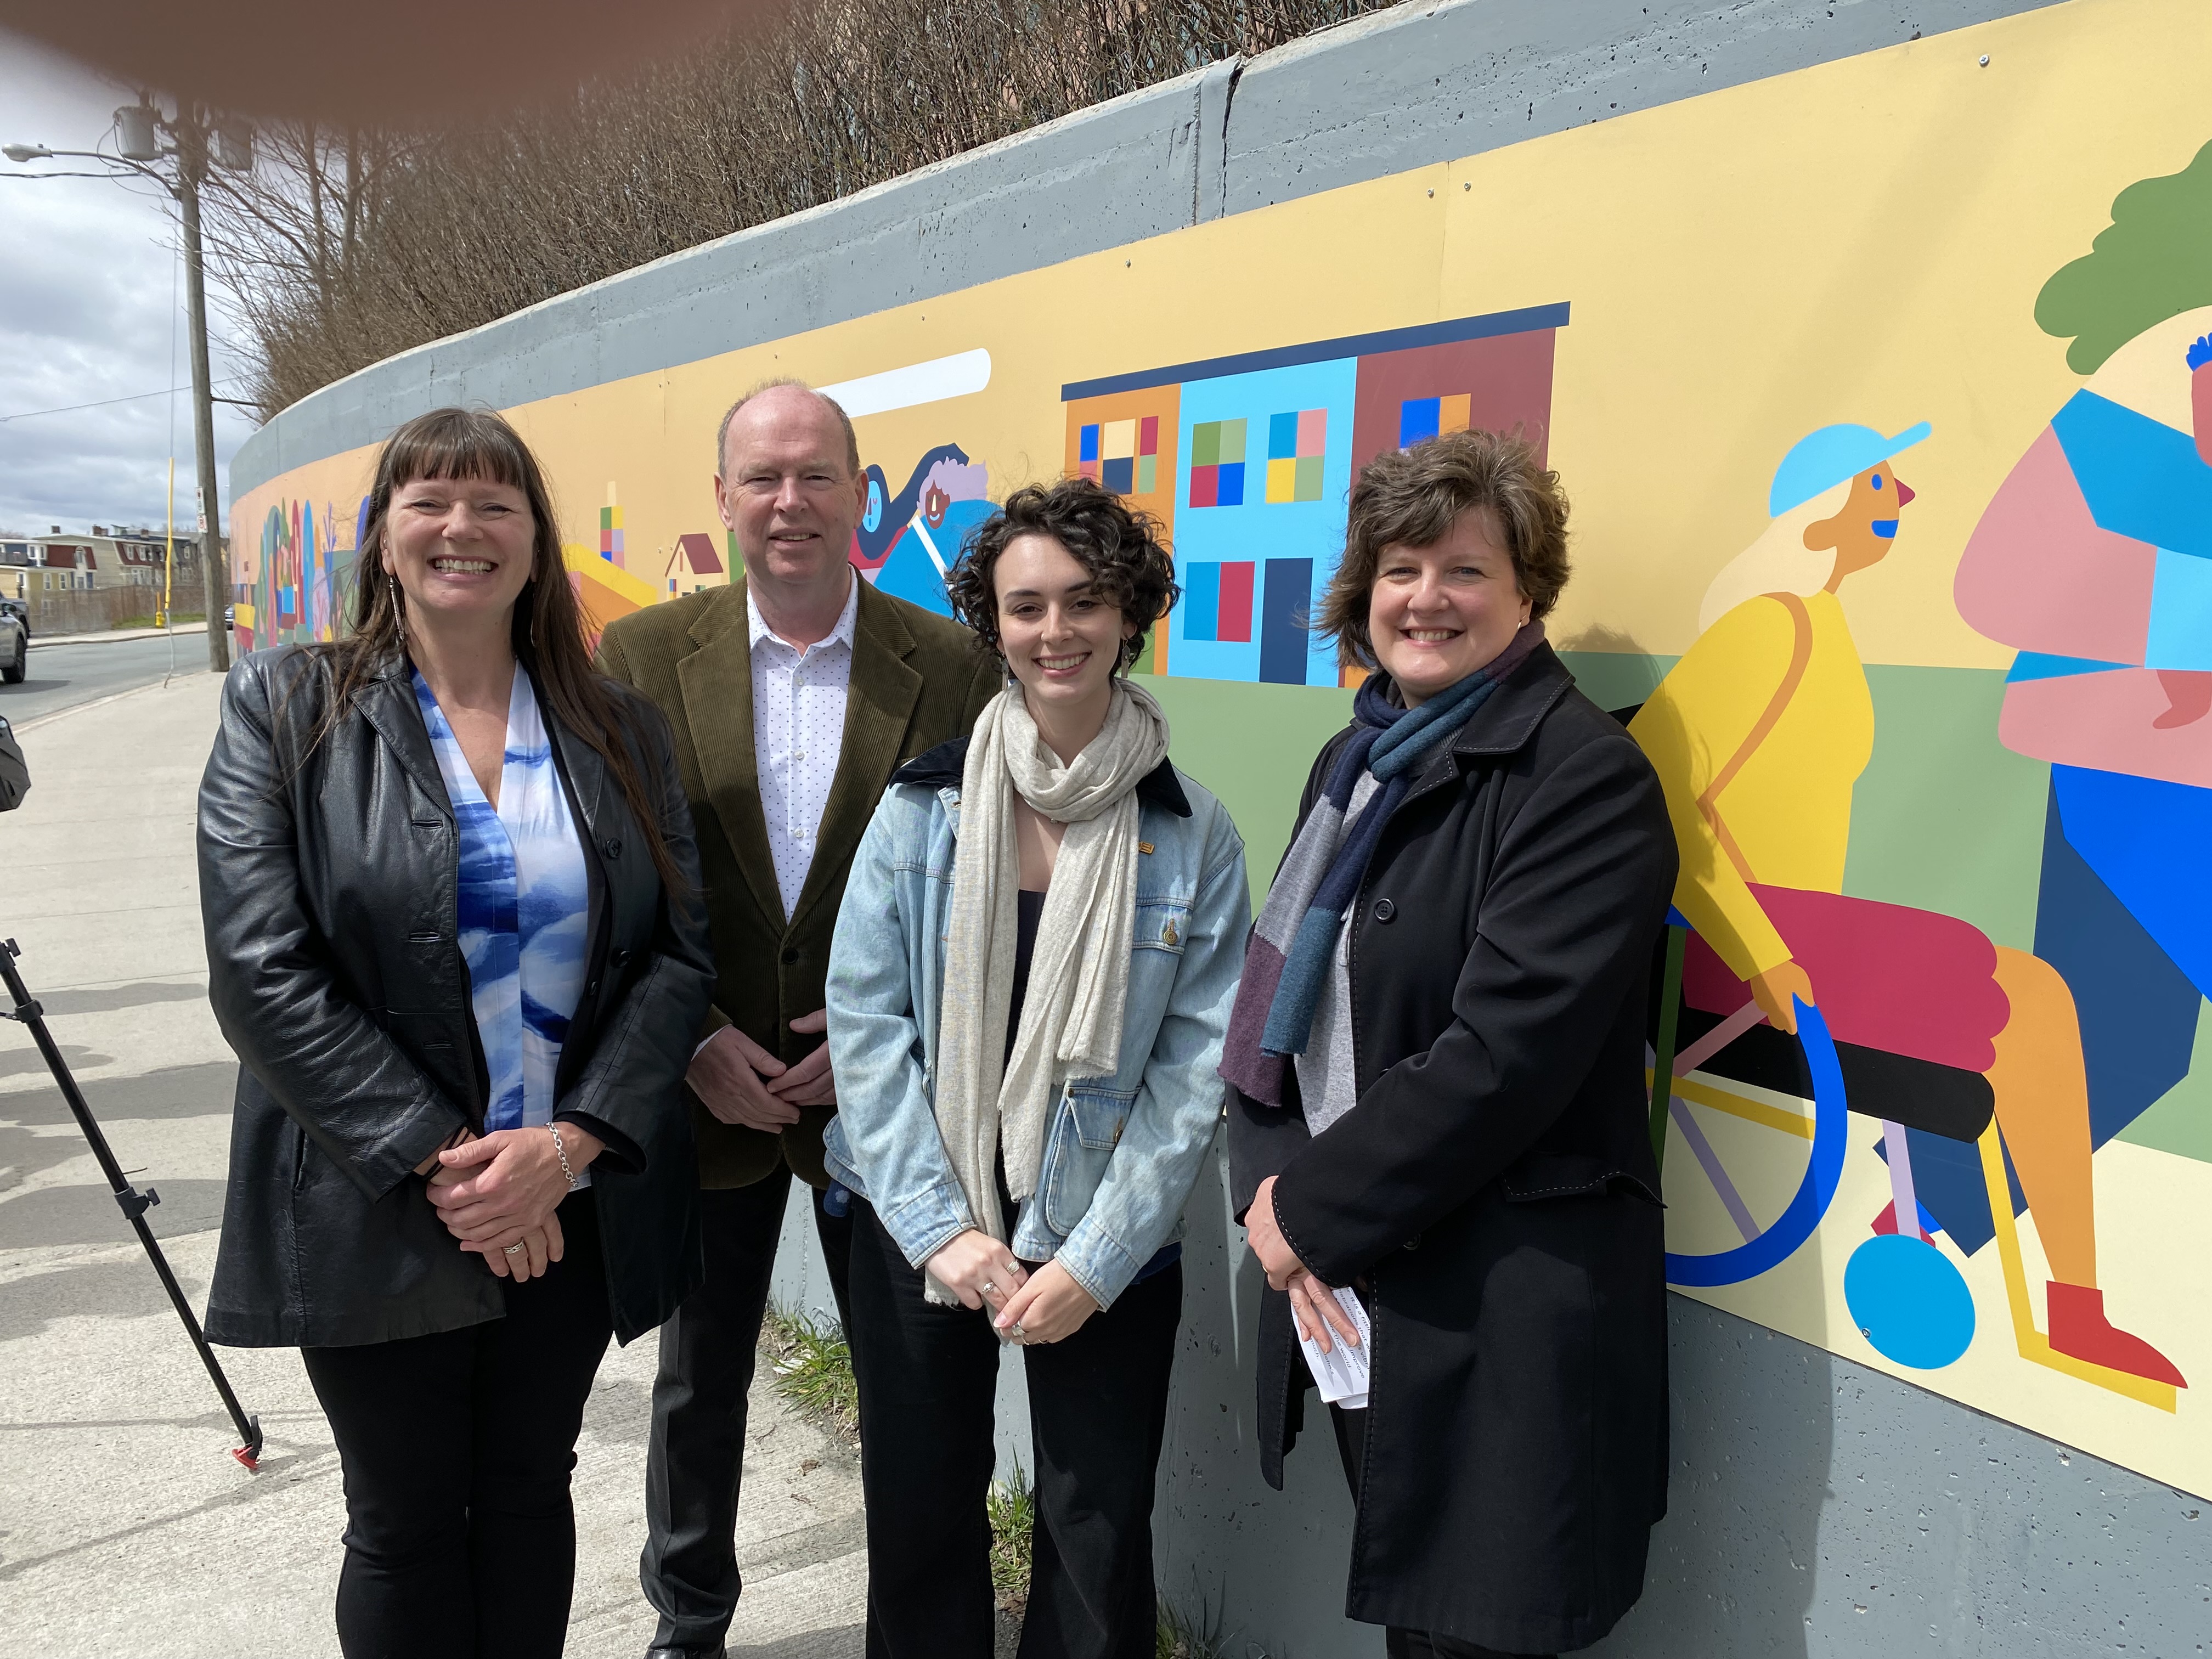 Four people stand in front of a colourful mural on harvey road.